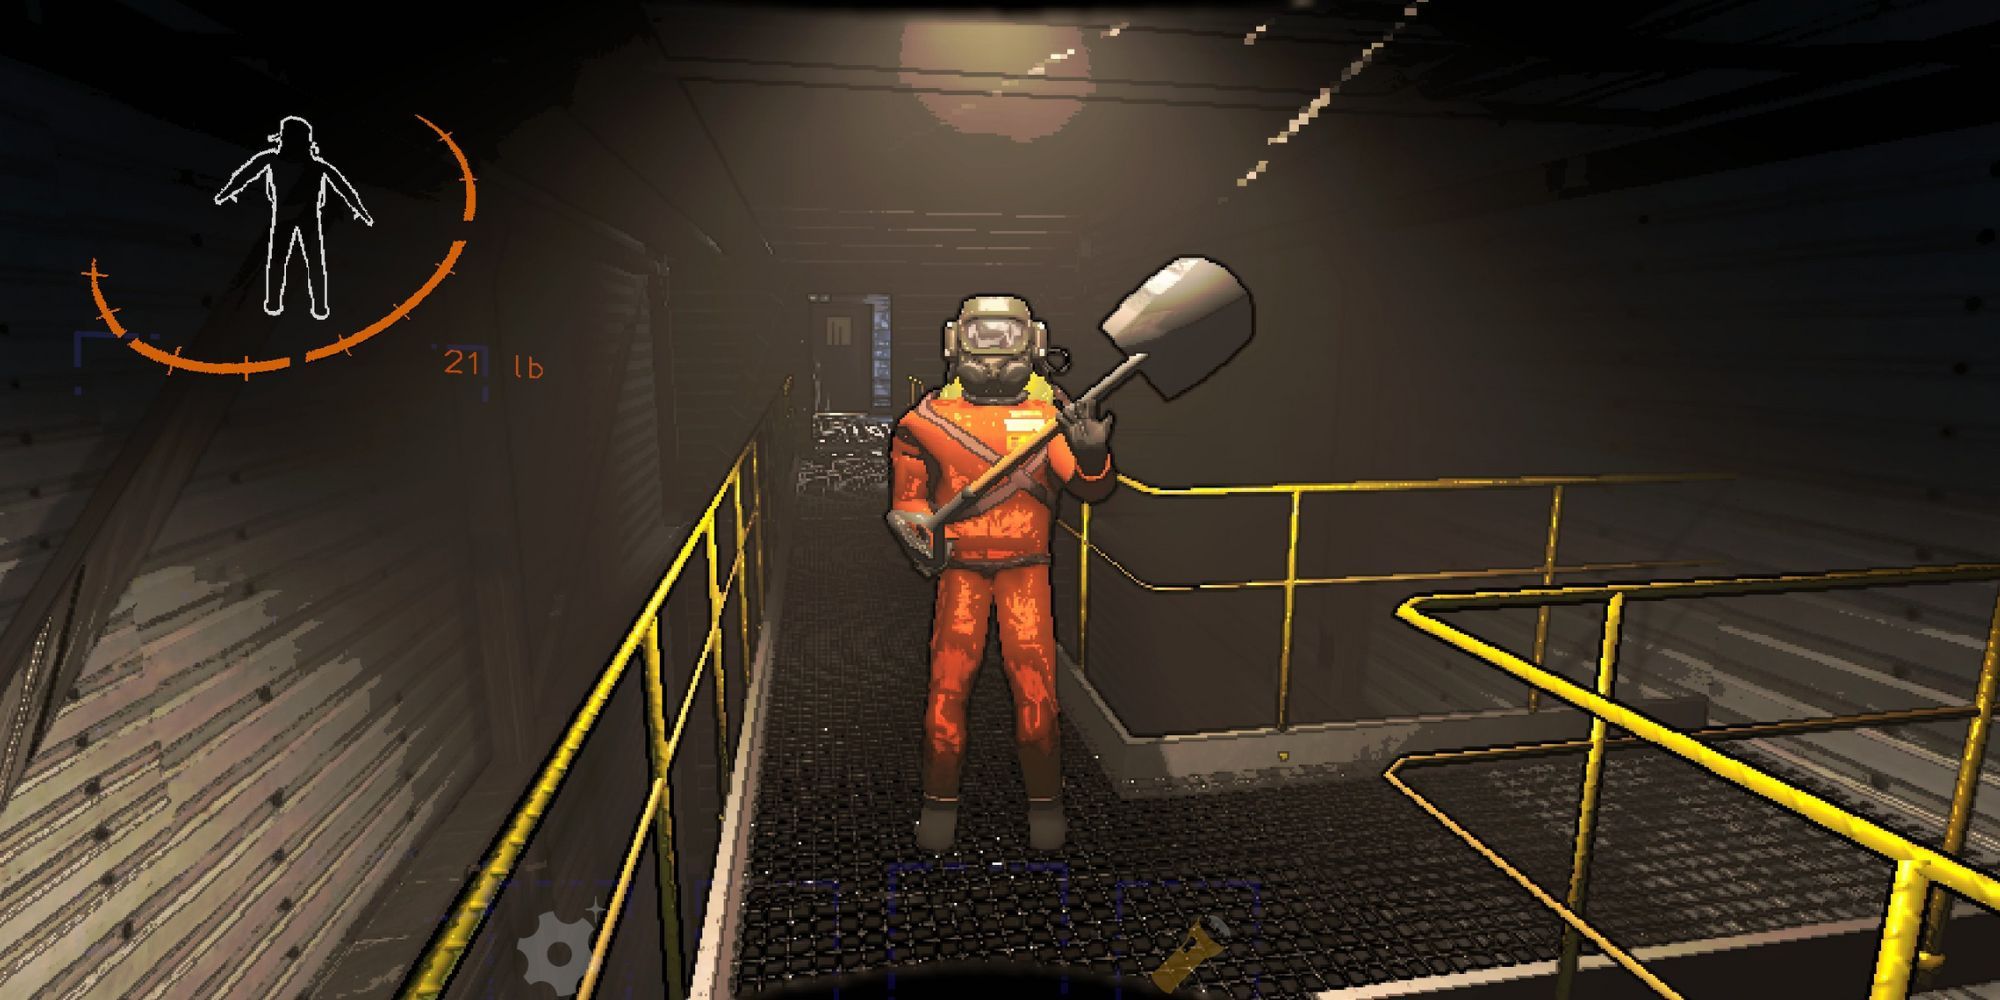 Lethal Company Player holding a shovel